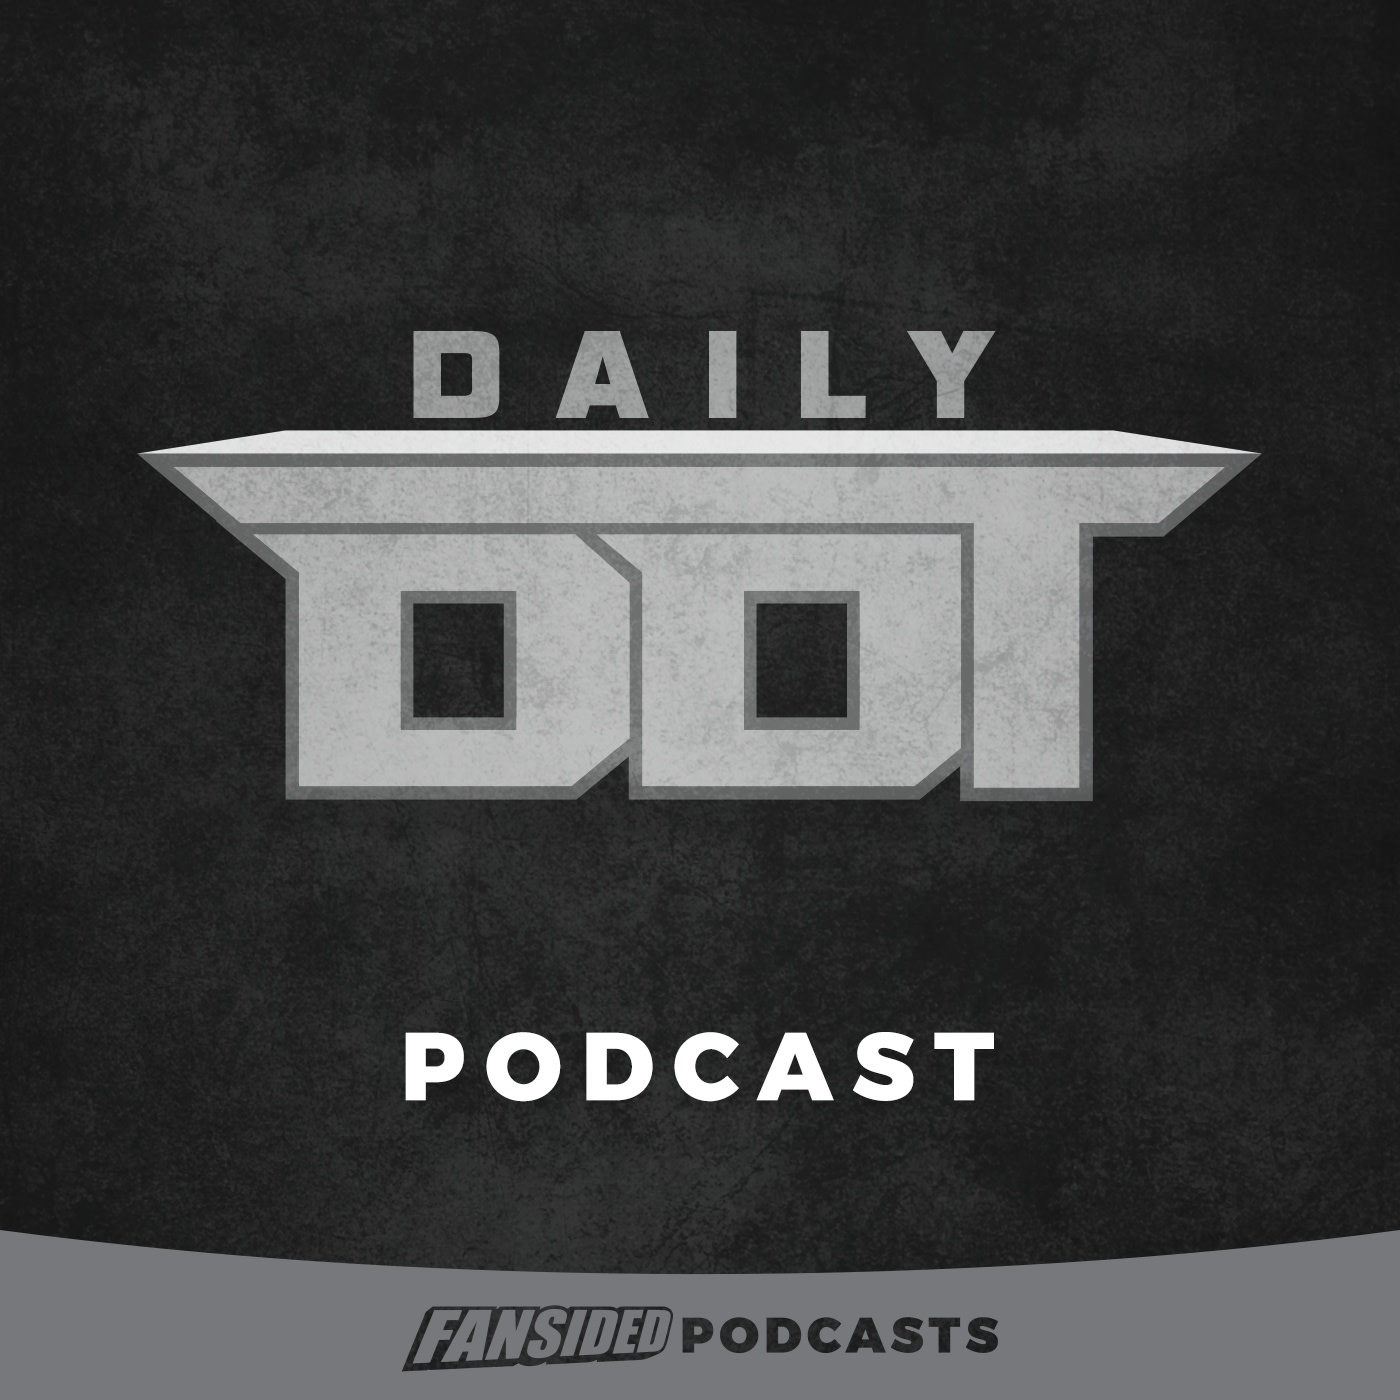 Sloth: Daily DDT Podcast Seven Deadly Sins Edition